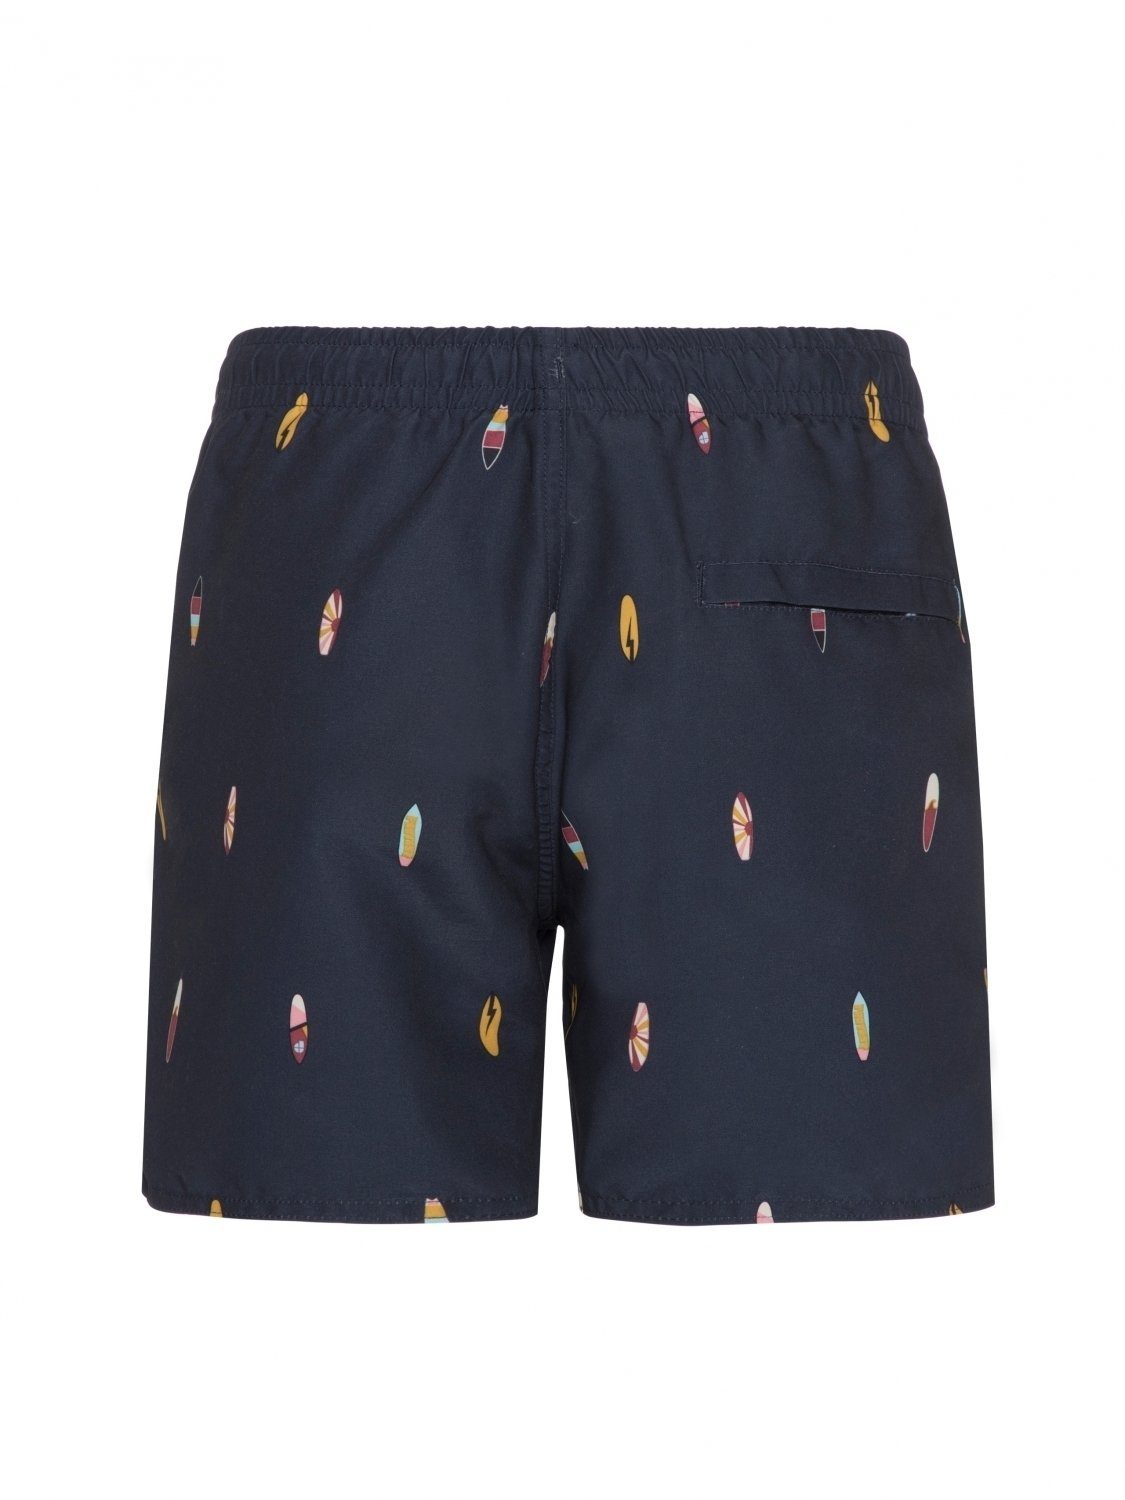 Protest Badeshorts Protest Prttyko Jungen Badehose